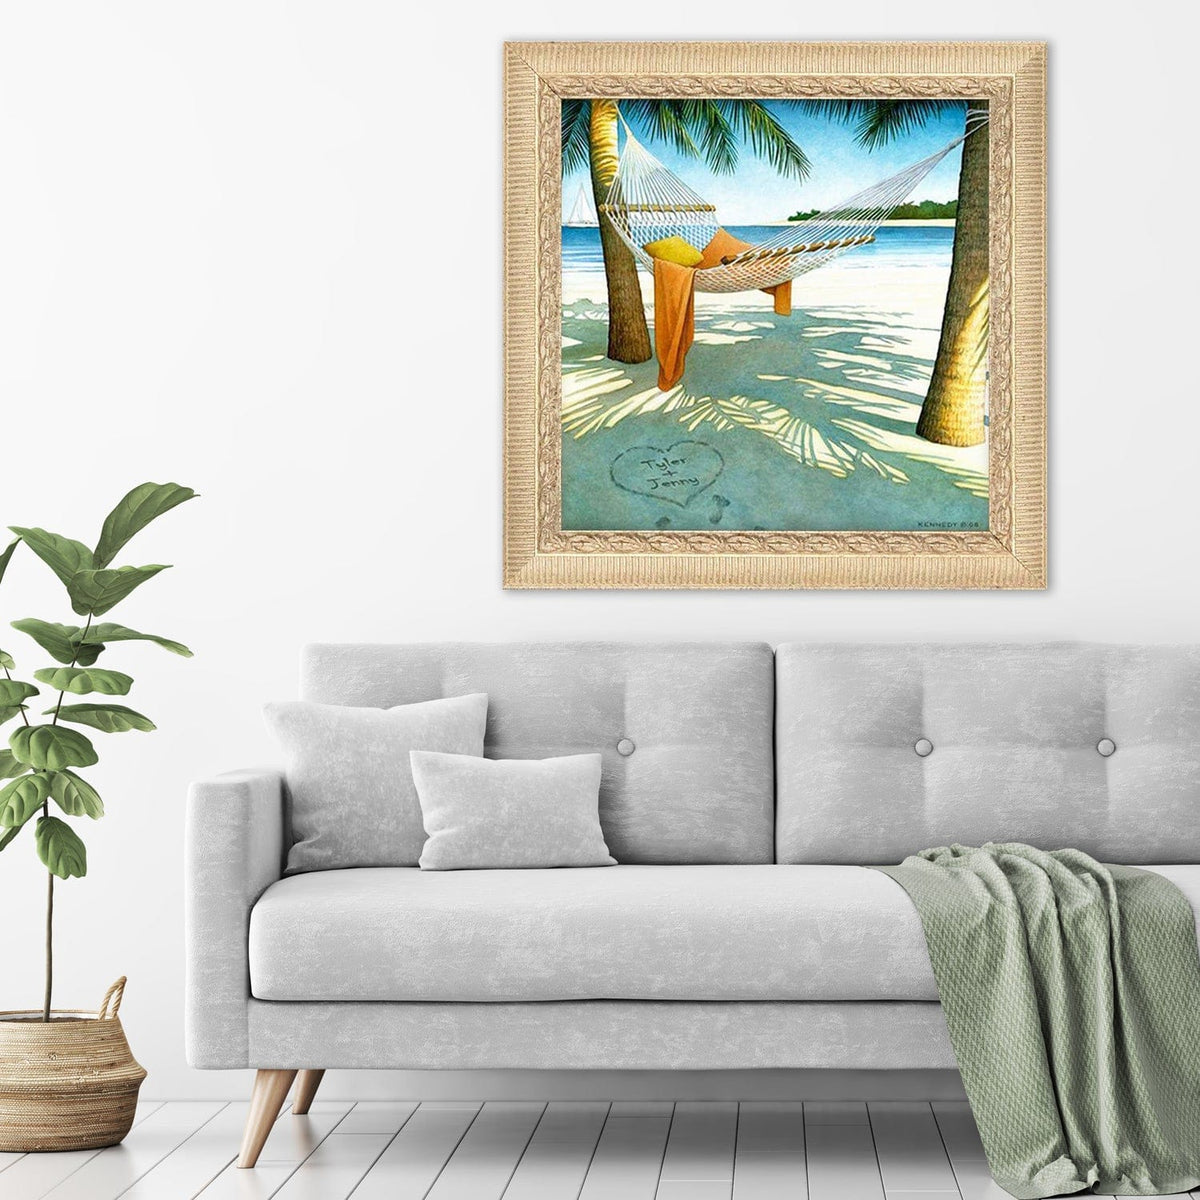 large canvas beach scene - personalized artwork from Personal Prints